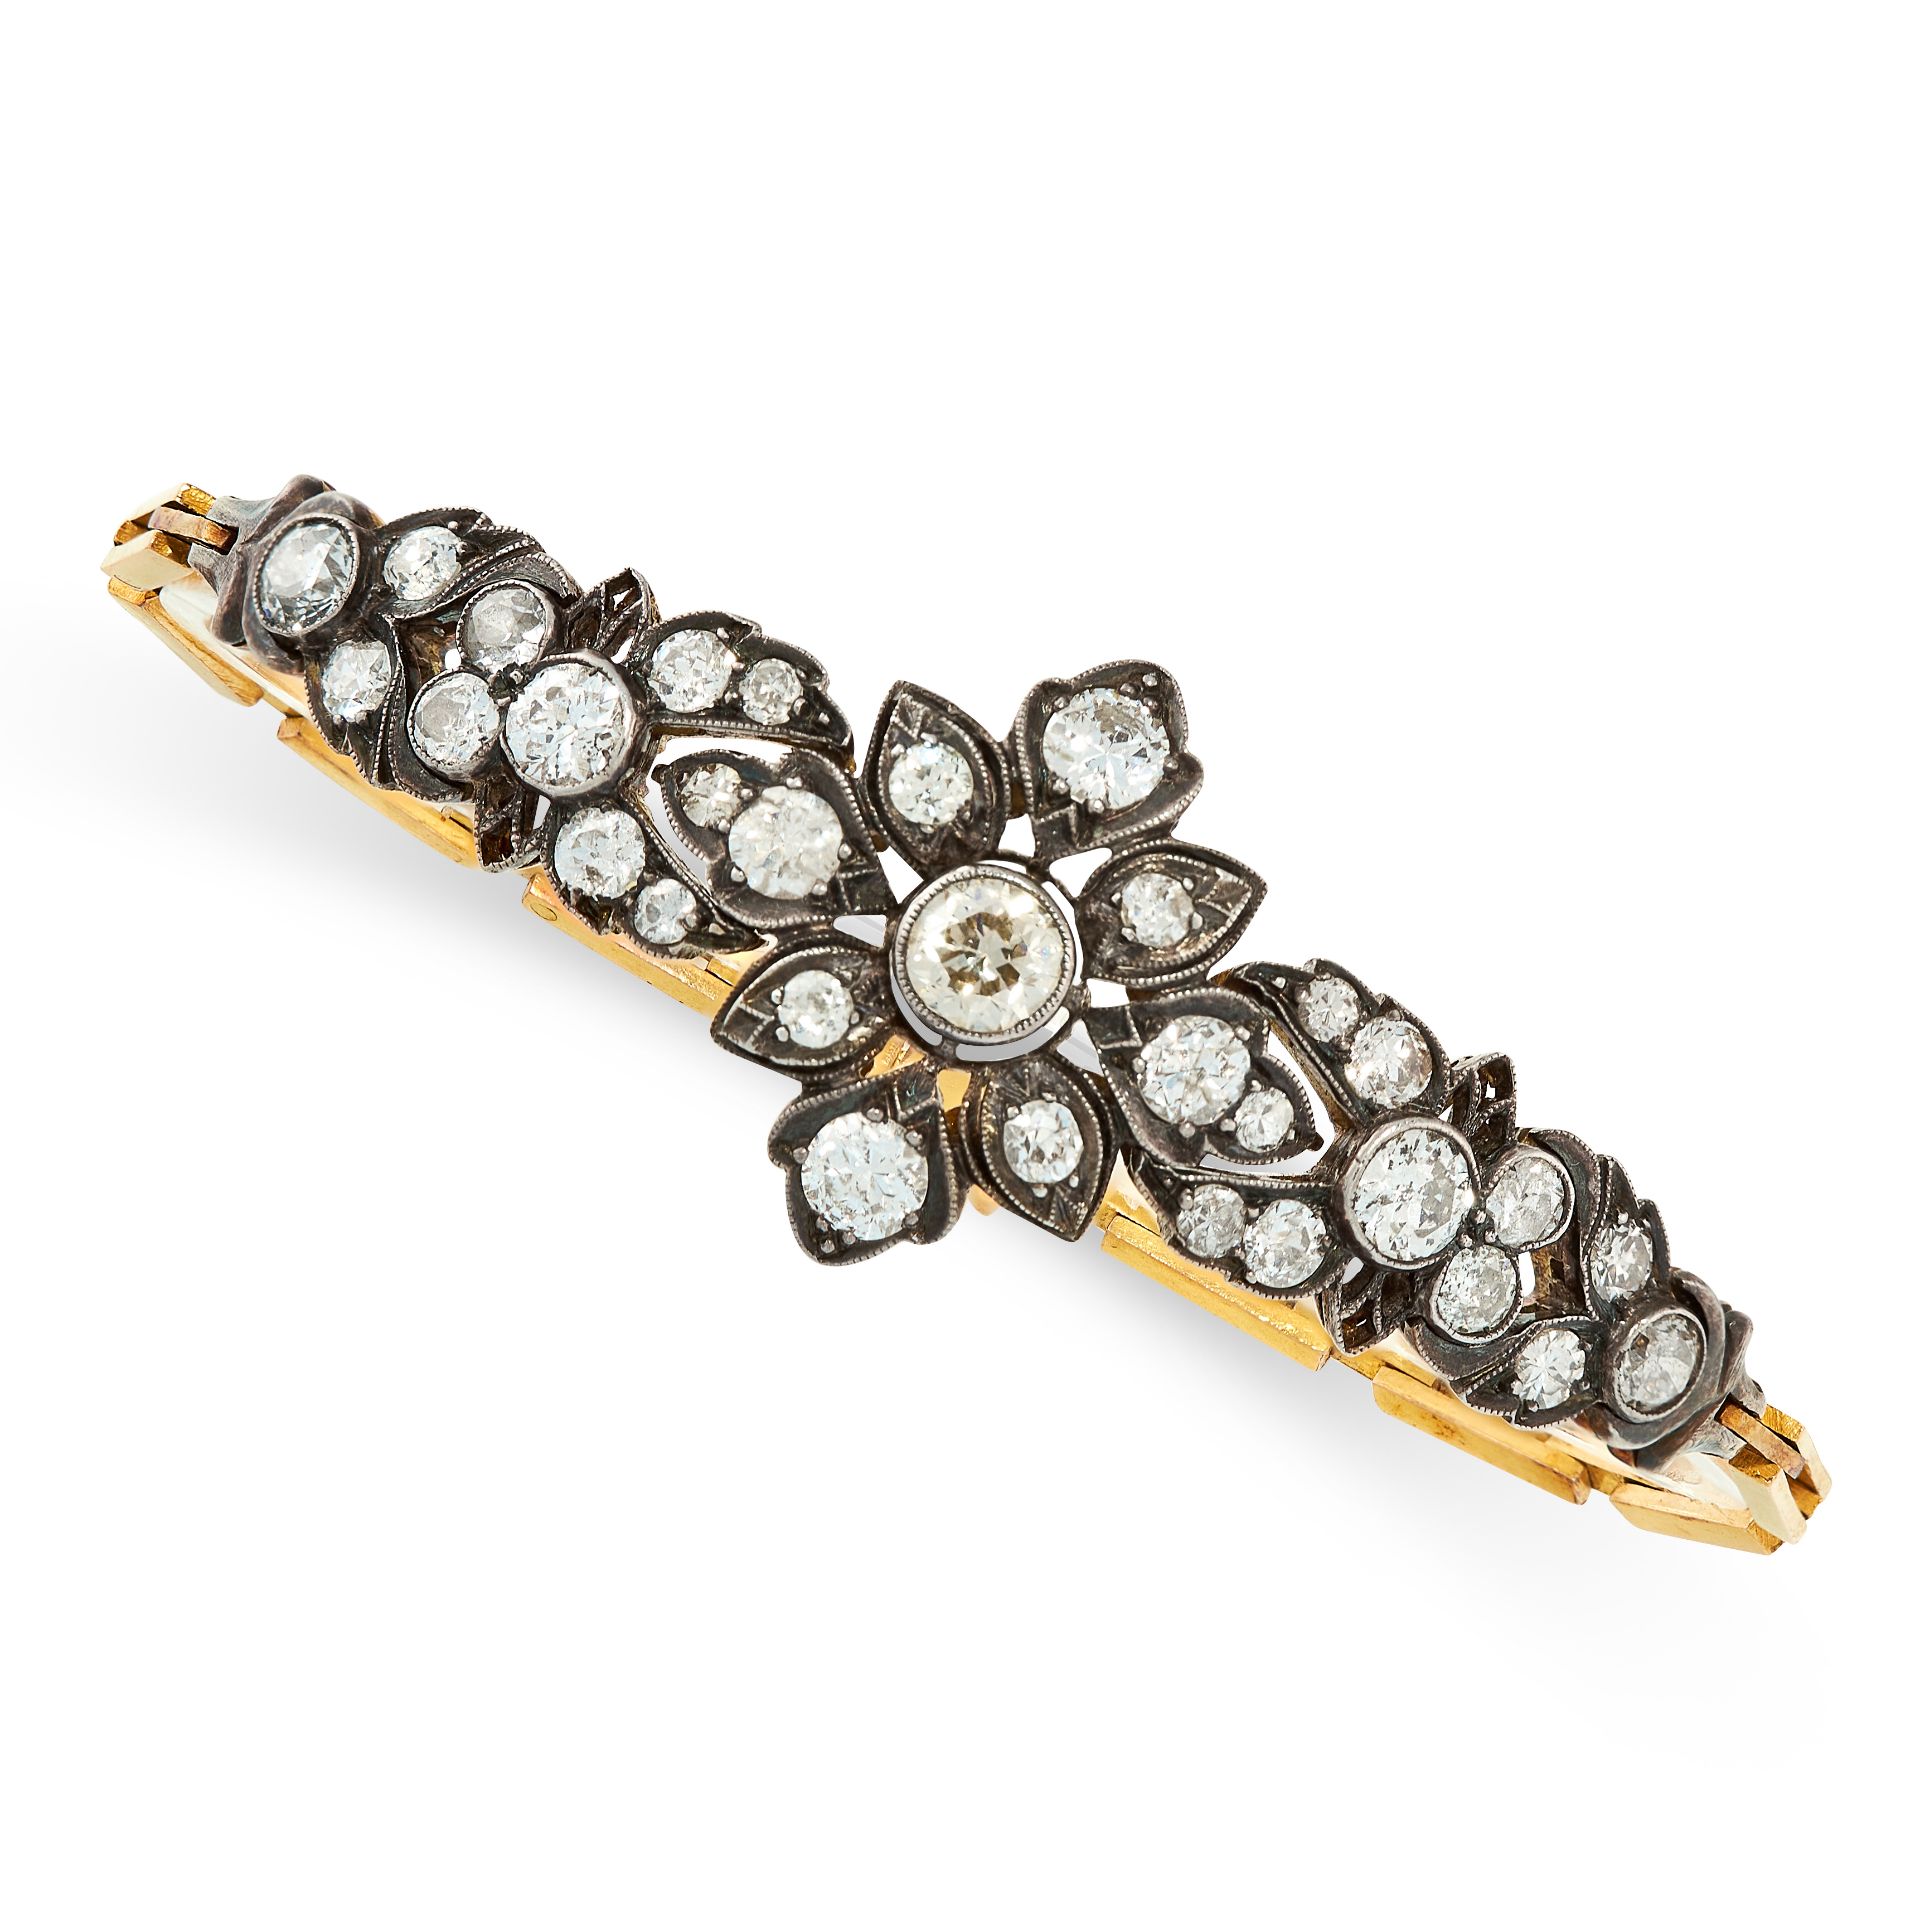 A DIAMOND BRACELET in yellow gold and silver, formed of a series of articulated foliate links, set